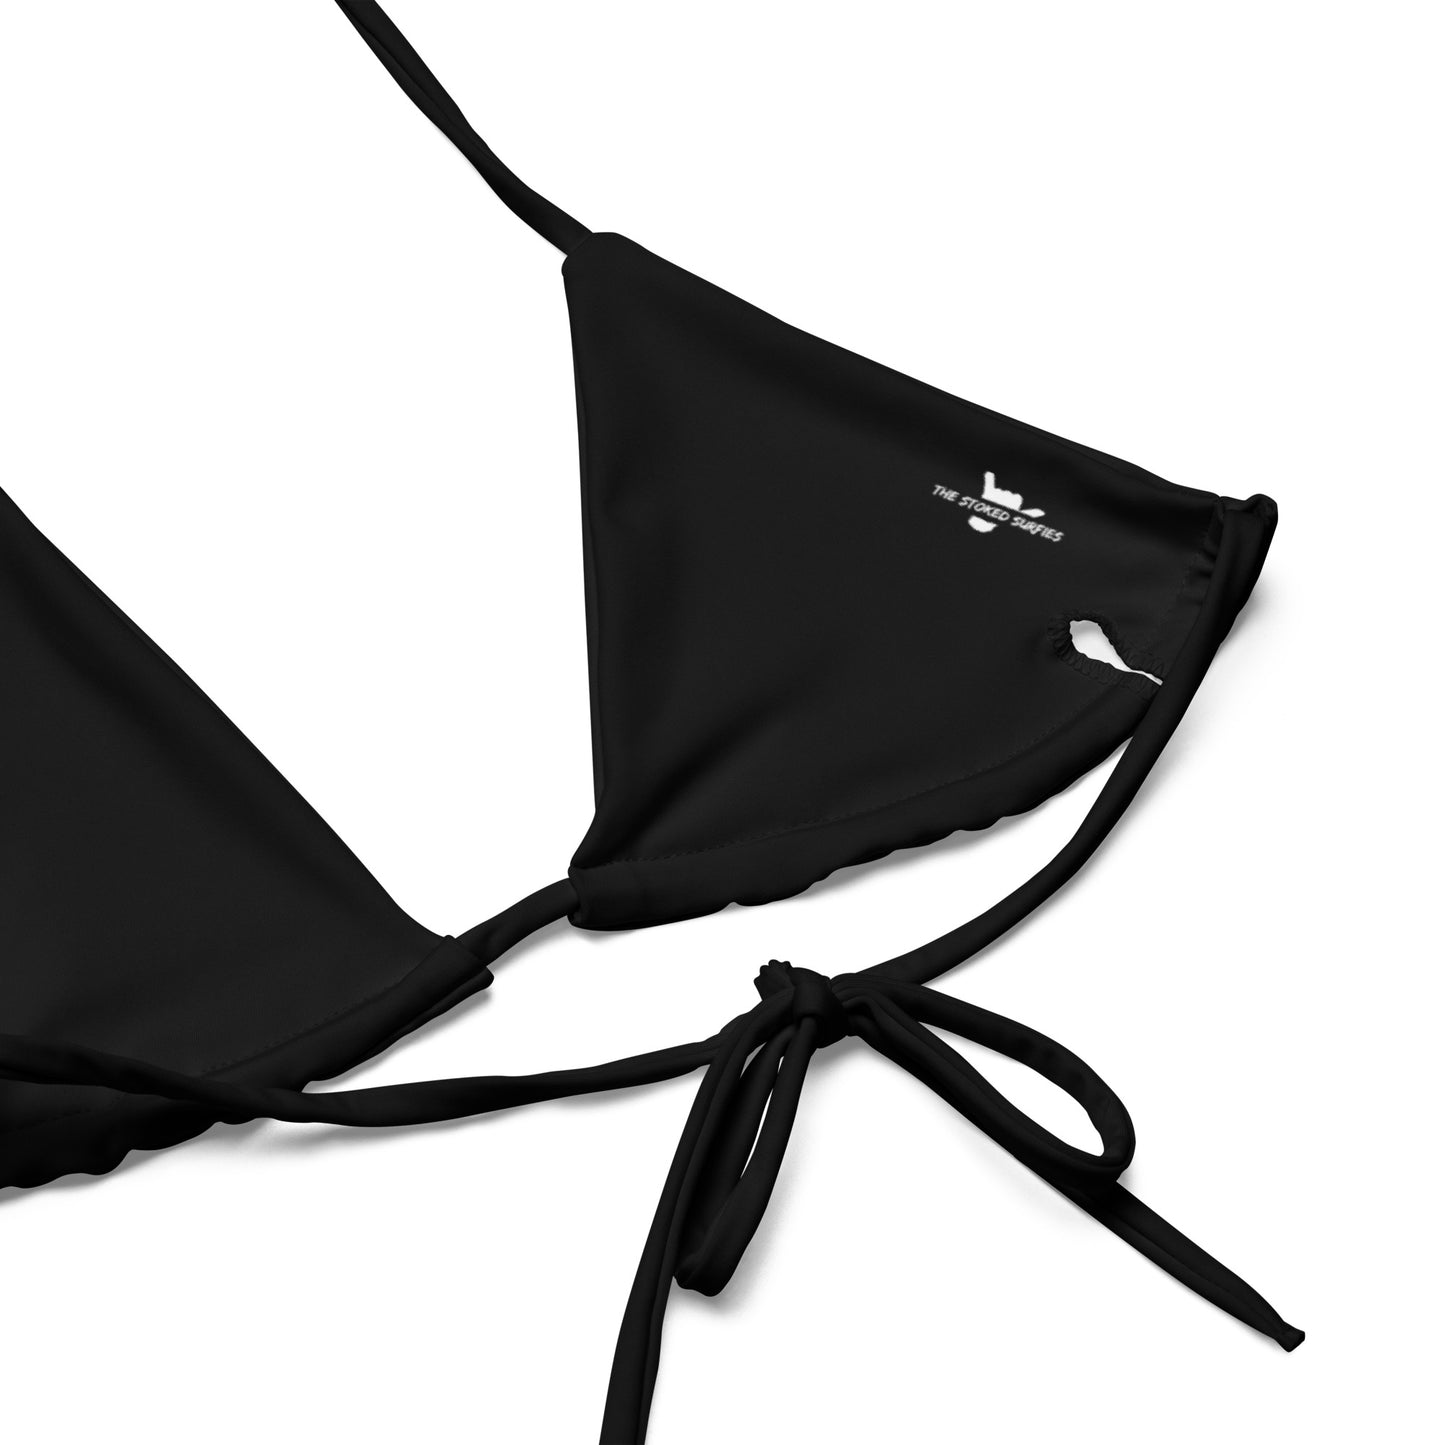 All-over  recycled string bikini